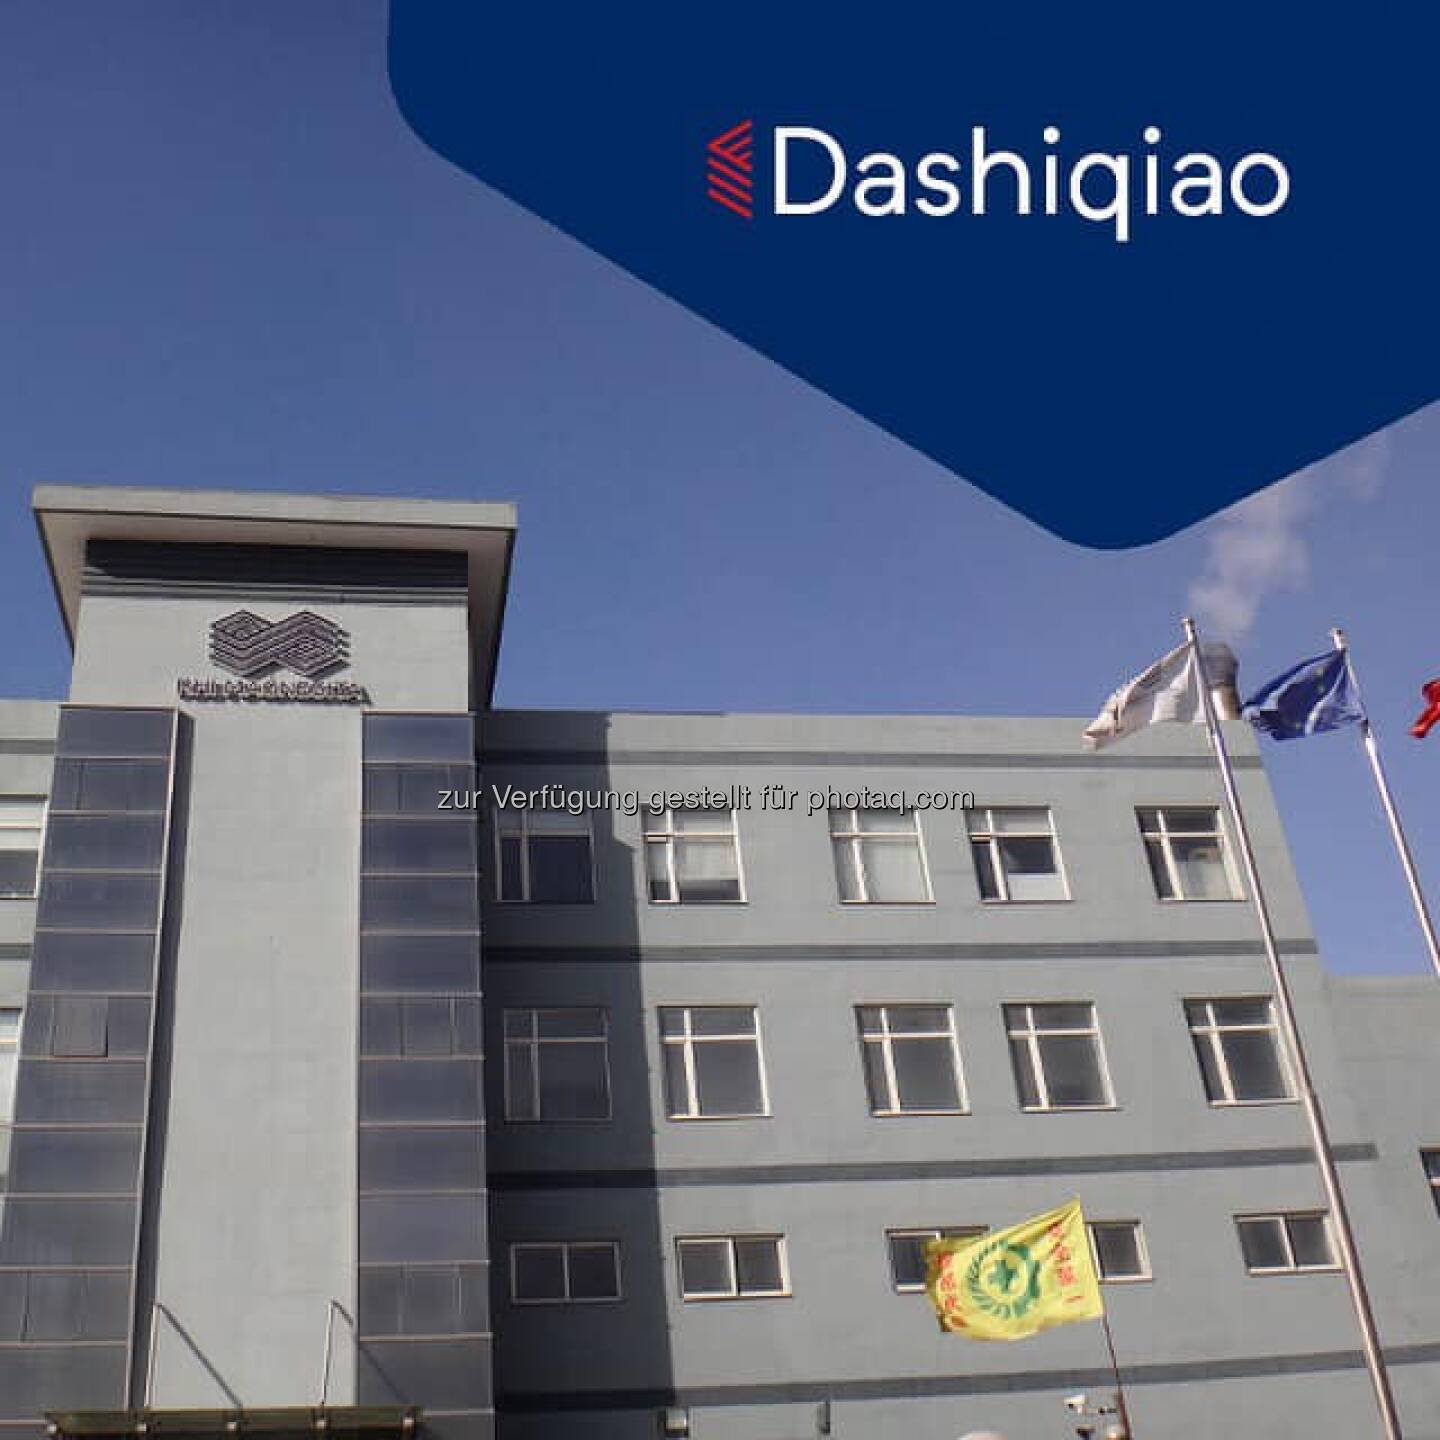 It’s time to explore the next destination of our #worldtour ✈️. Today we’re travelling to China and show you our Dashiqiao site in Yingkou City, Liaoning Province, China   Source: http://facebook.com/133039406833055